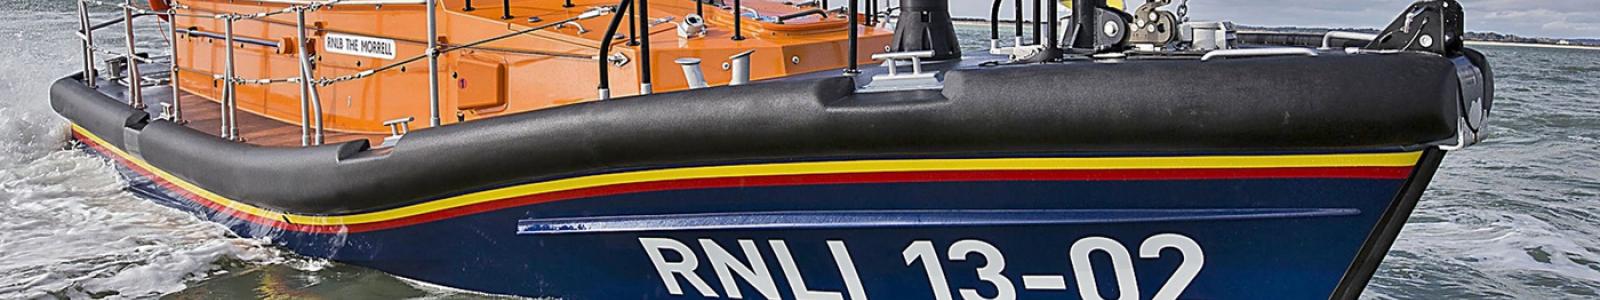 Tailor-made fenders for the Shannon Class lifeboat, by RNLI